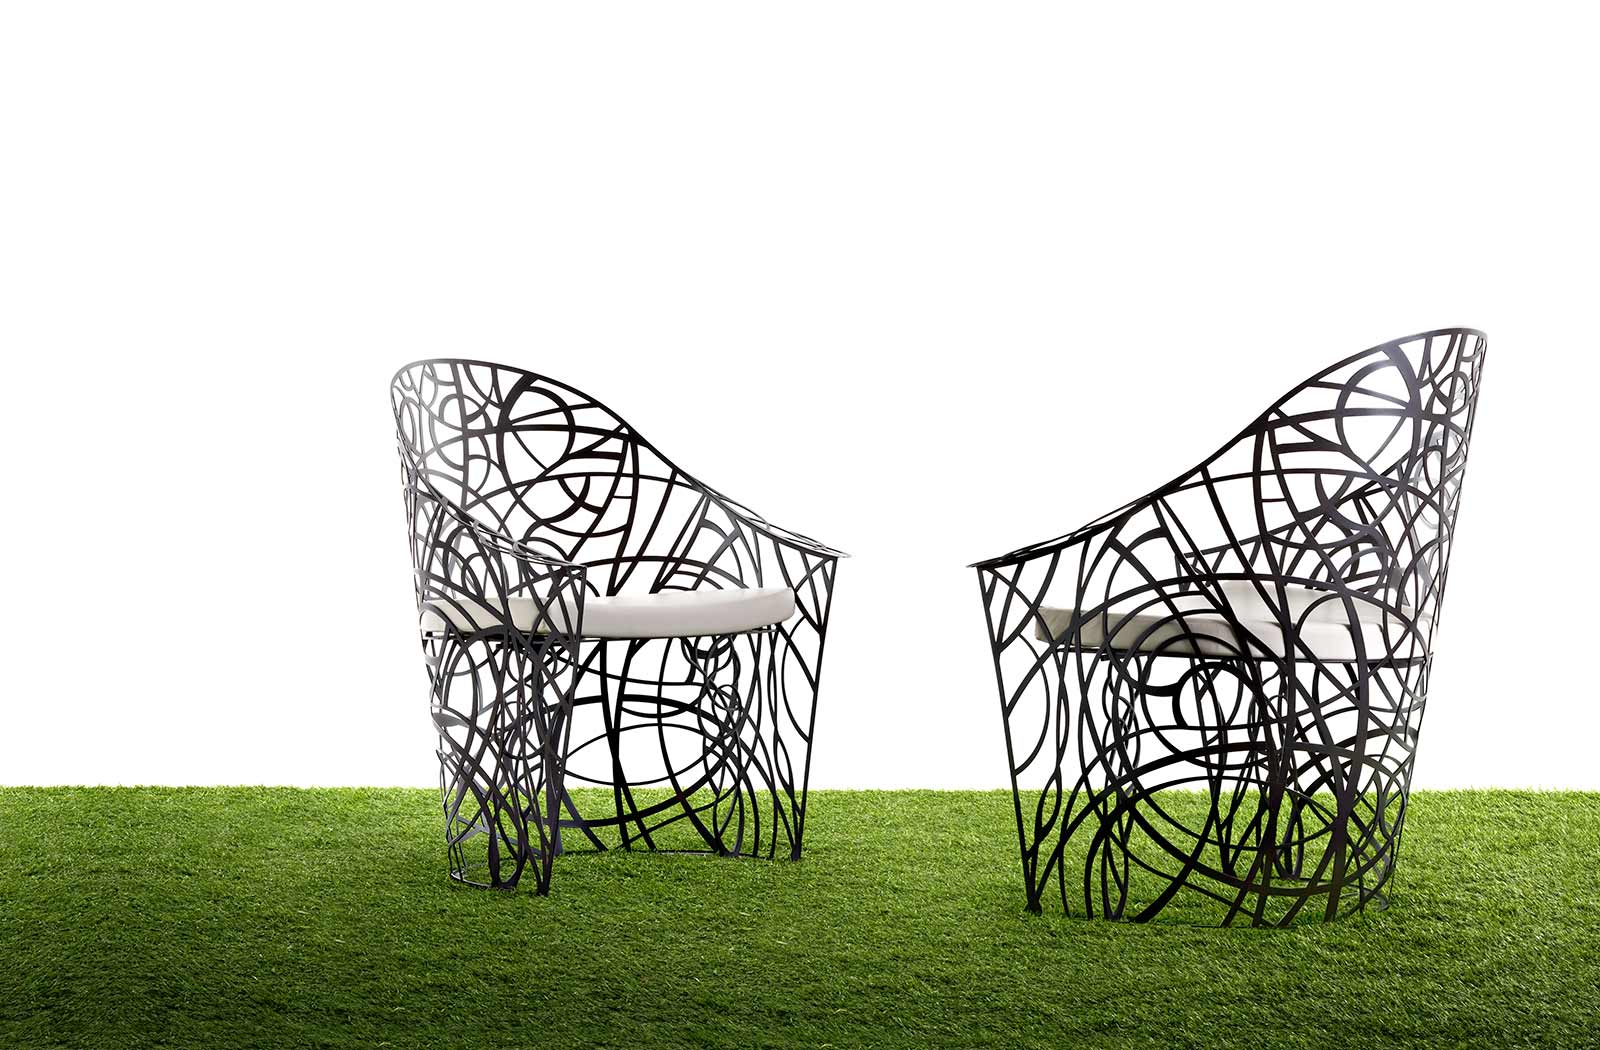 armchair for outdoors,best outdoor furniture,black and white outdoor furniture,chair for outdoors,contemporary outdoor furniture,decorative trellis,garden trellis,modern outdoor furniture,outdoor chairs,outdoor furniture,outdoor furniture set,outdoor trellis,outdoors tables,patio trellis,unusual patio furniture